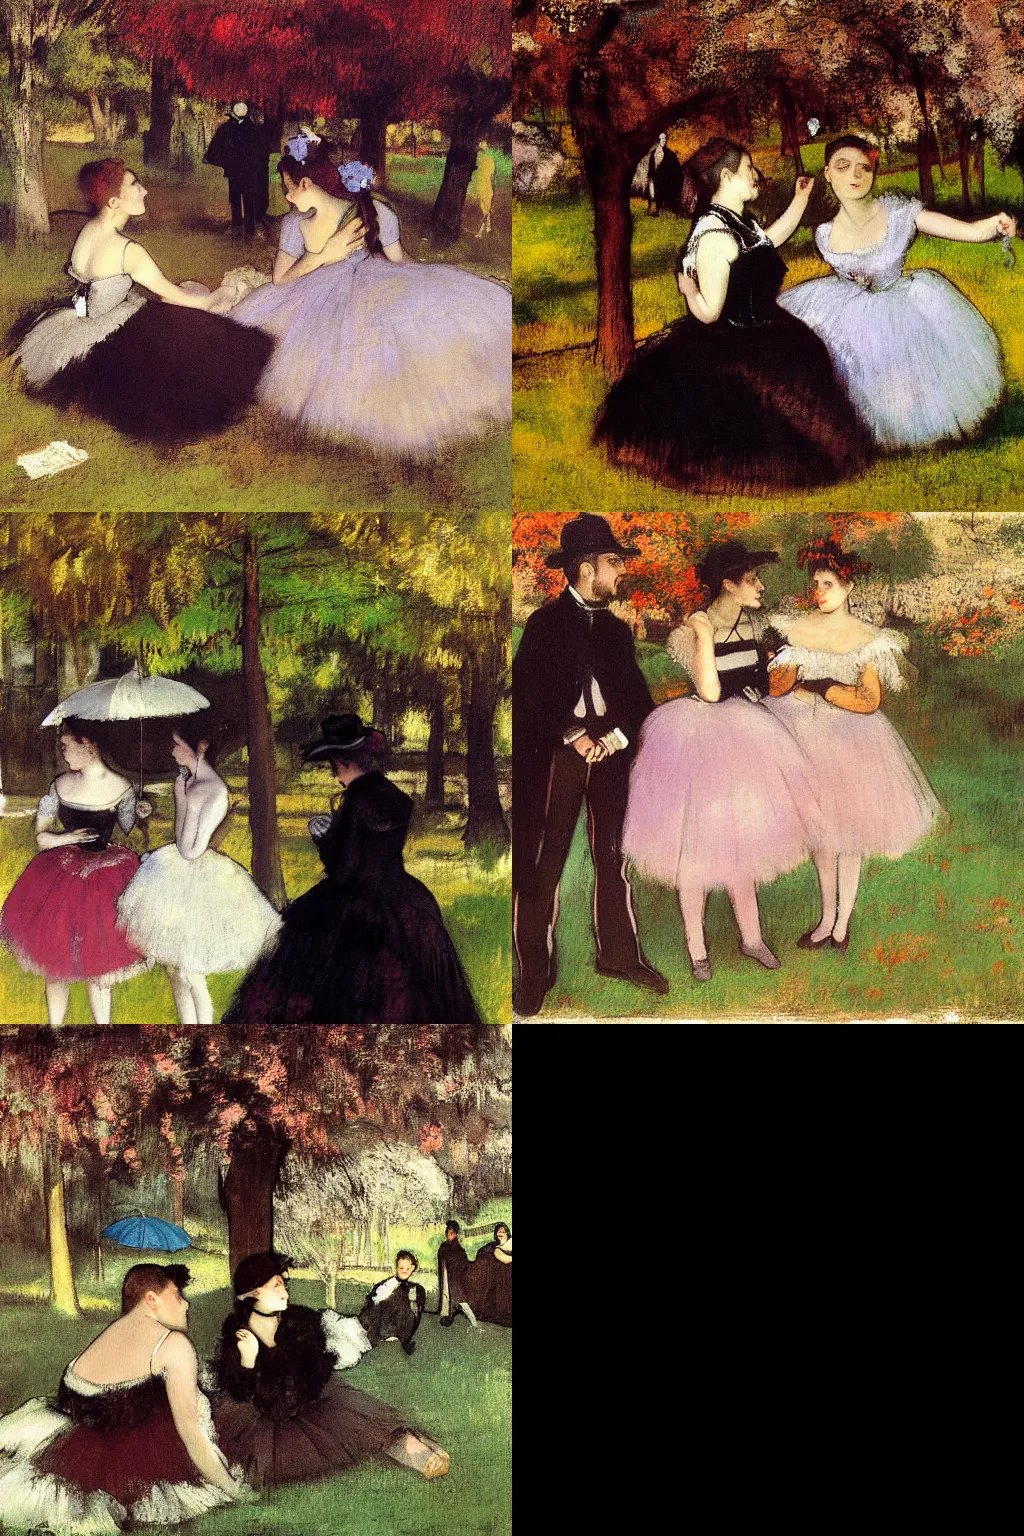 Prompt: an hd painting by edgar degas. three goths loitering in the shade, talking beneath a cherry tree outside a blockbuster video store.